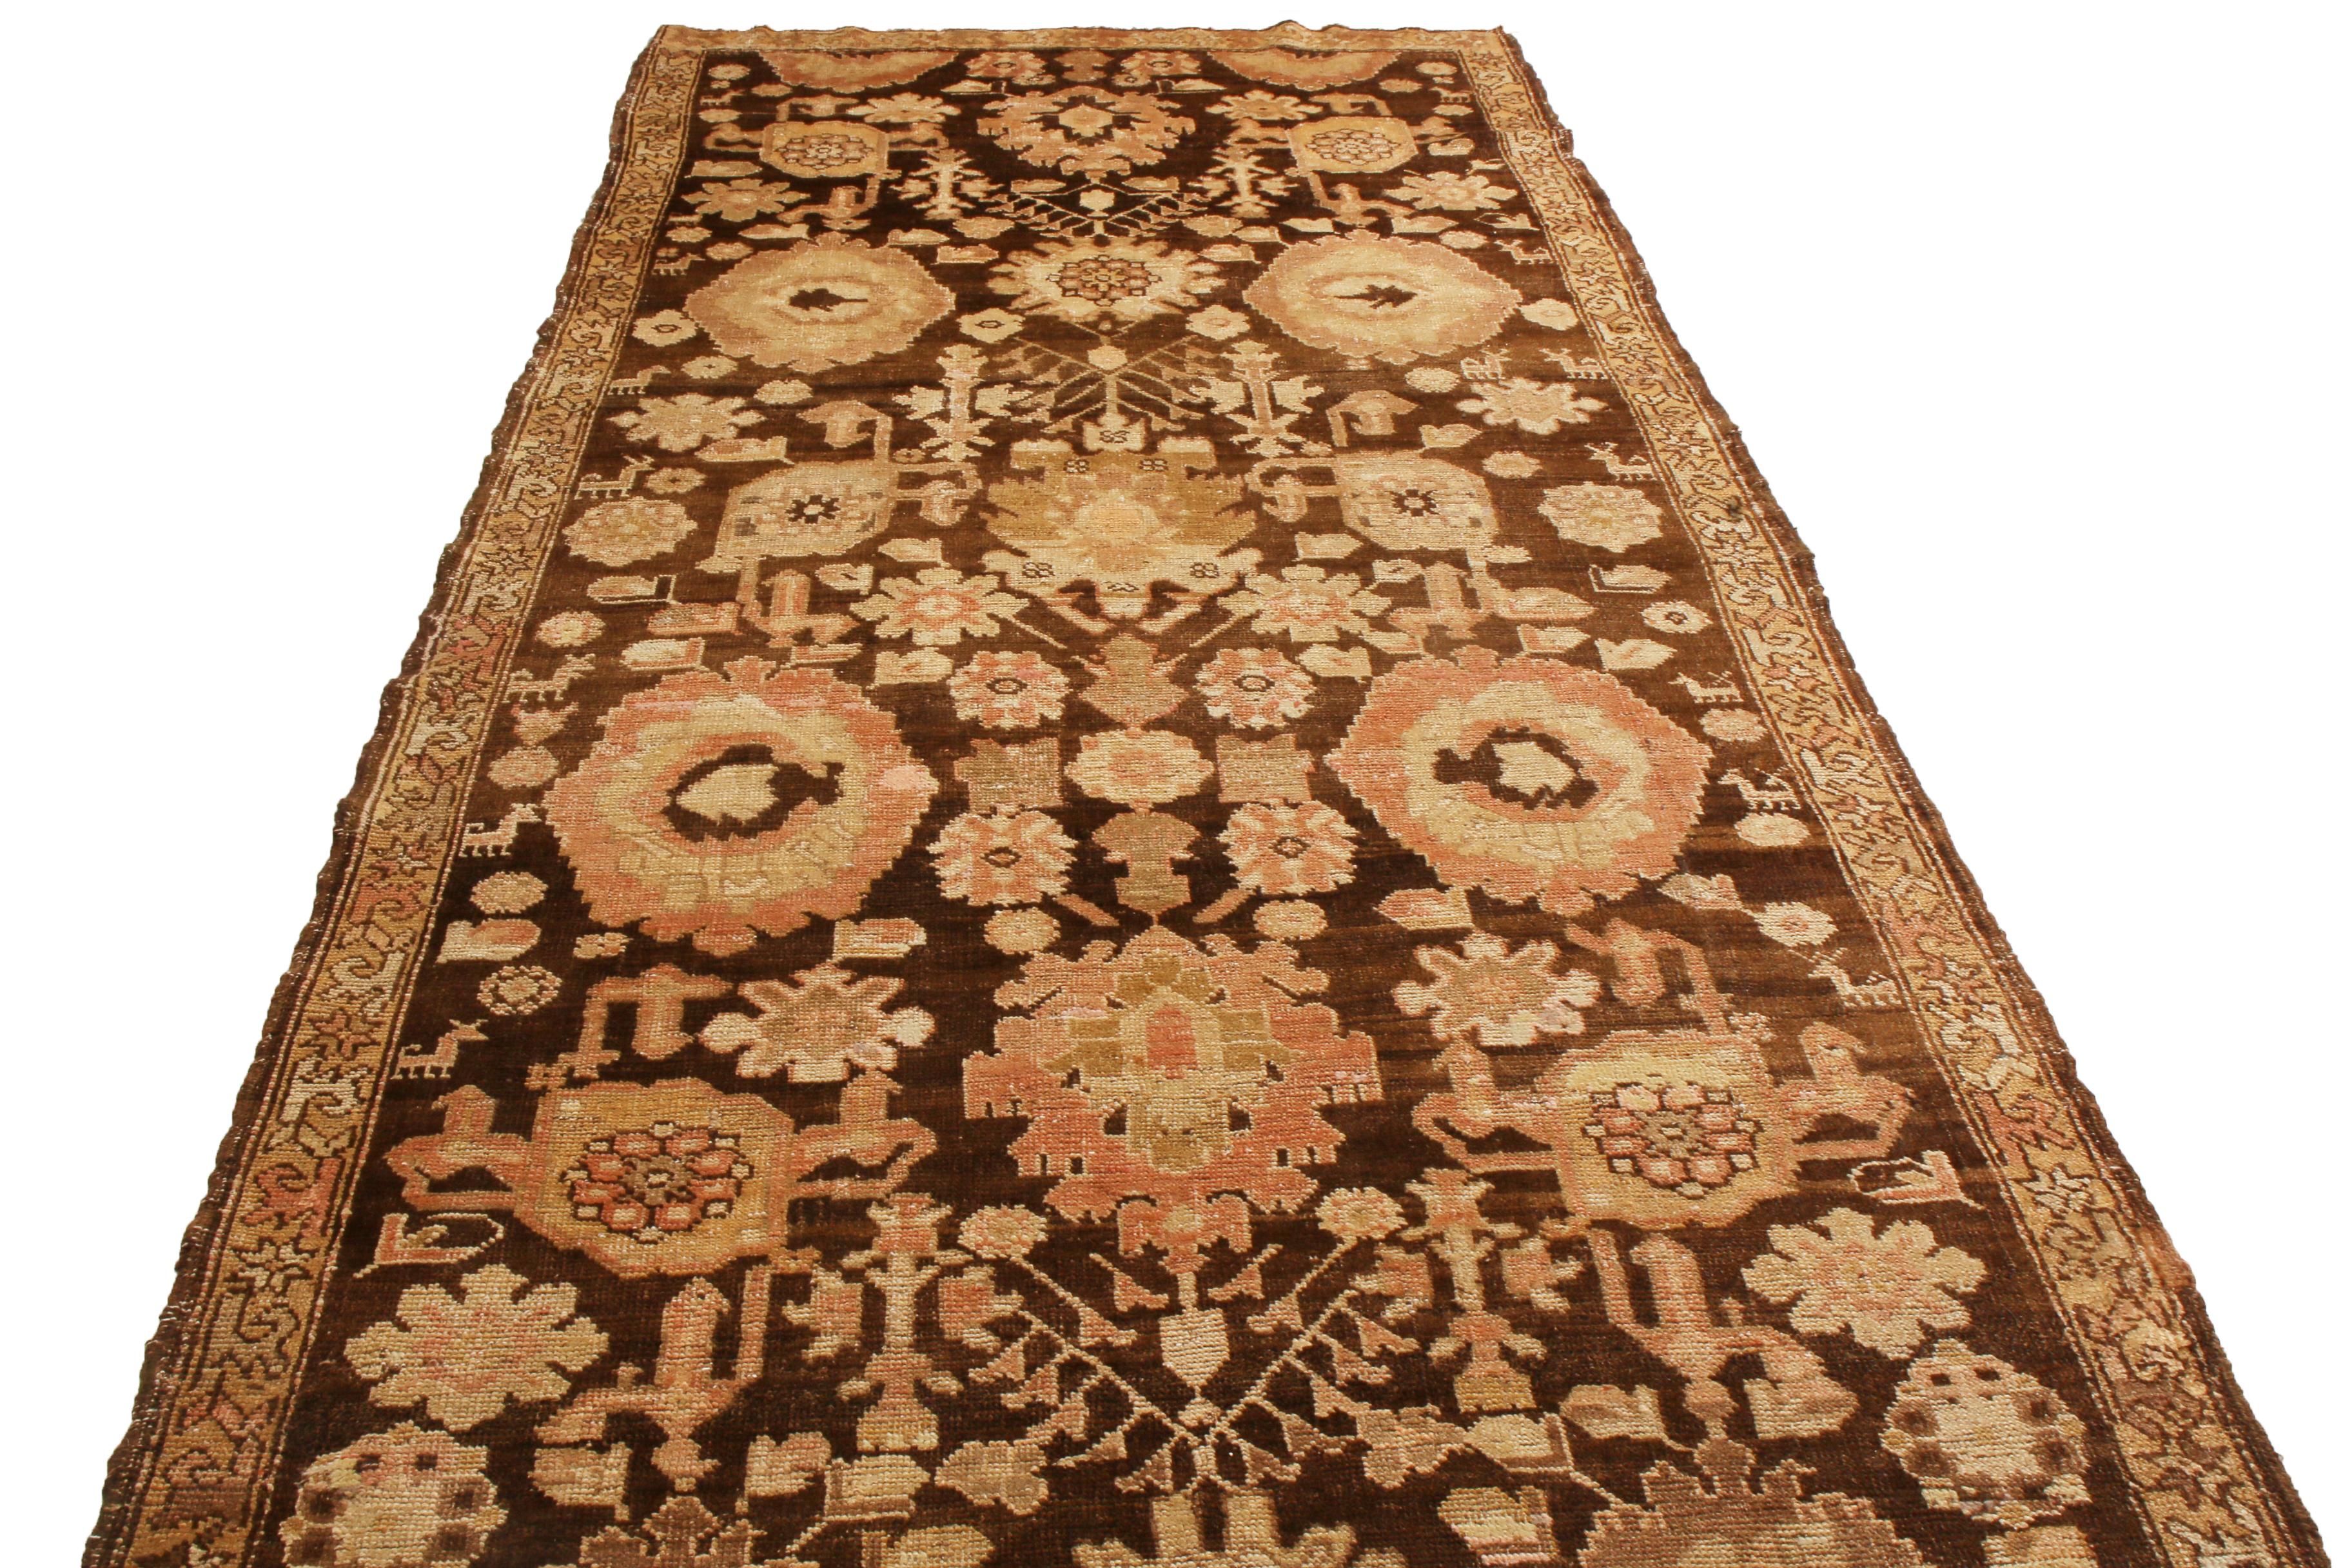 Hand-Knotted Antique Karabagh Rug in Beige Brown Geometric-Floral Pattern by Rug & Kilim For Sale